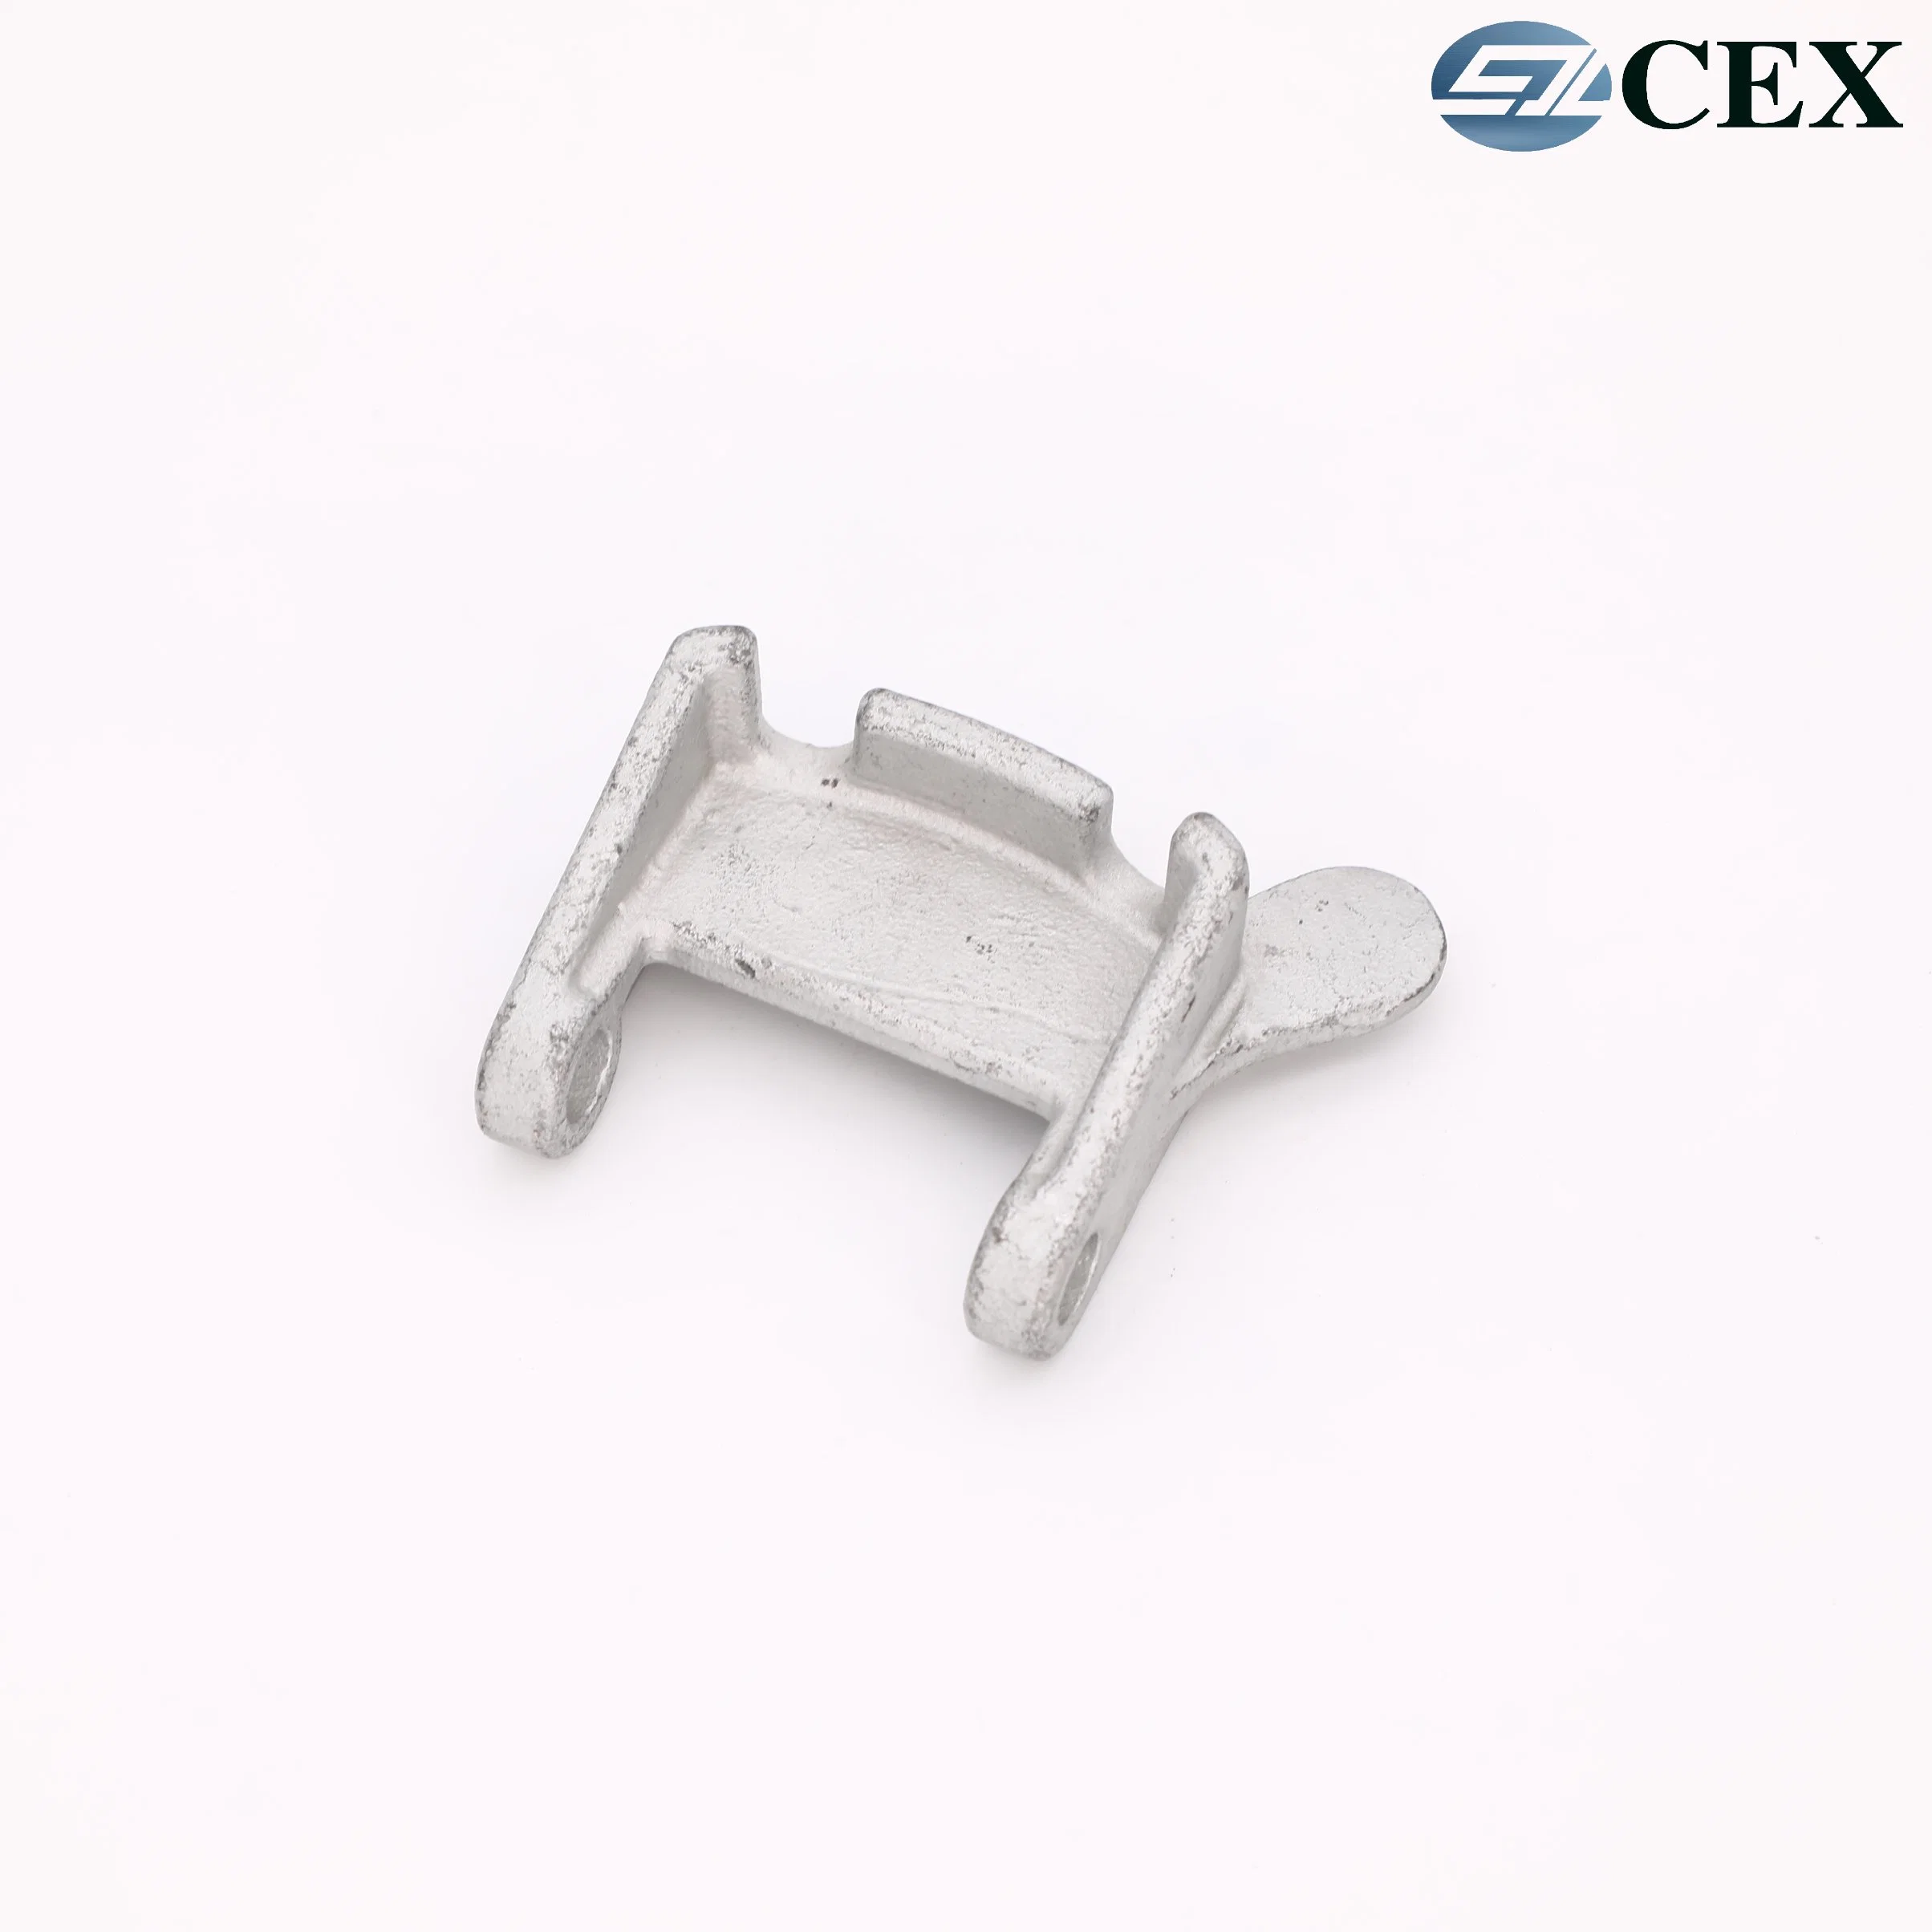 High Precision Aluminum Alloy Drop Forging for Car/Auto/Motor/Pump/Engine/Motorcycle Parts with Machining/Casting/Forging Part